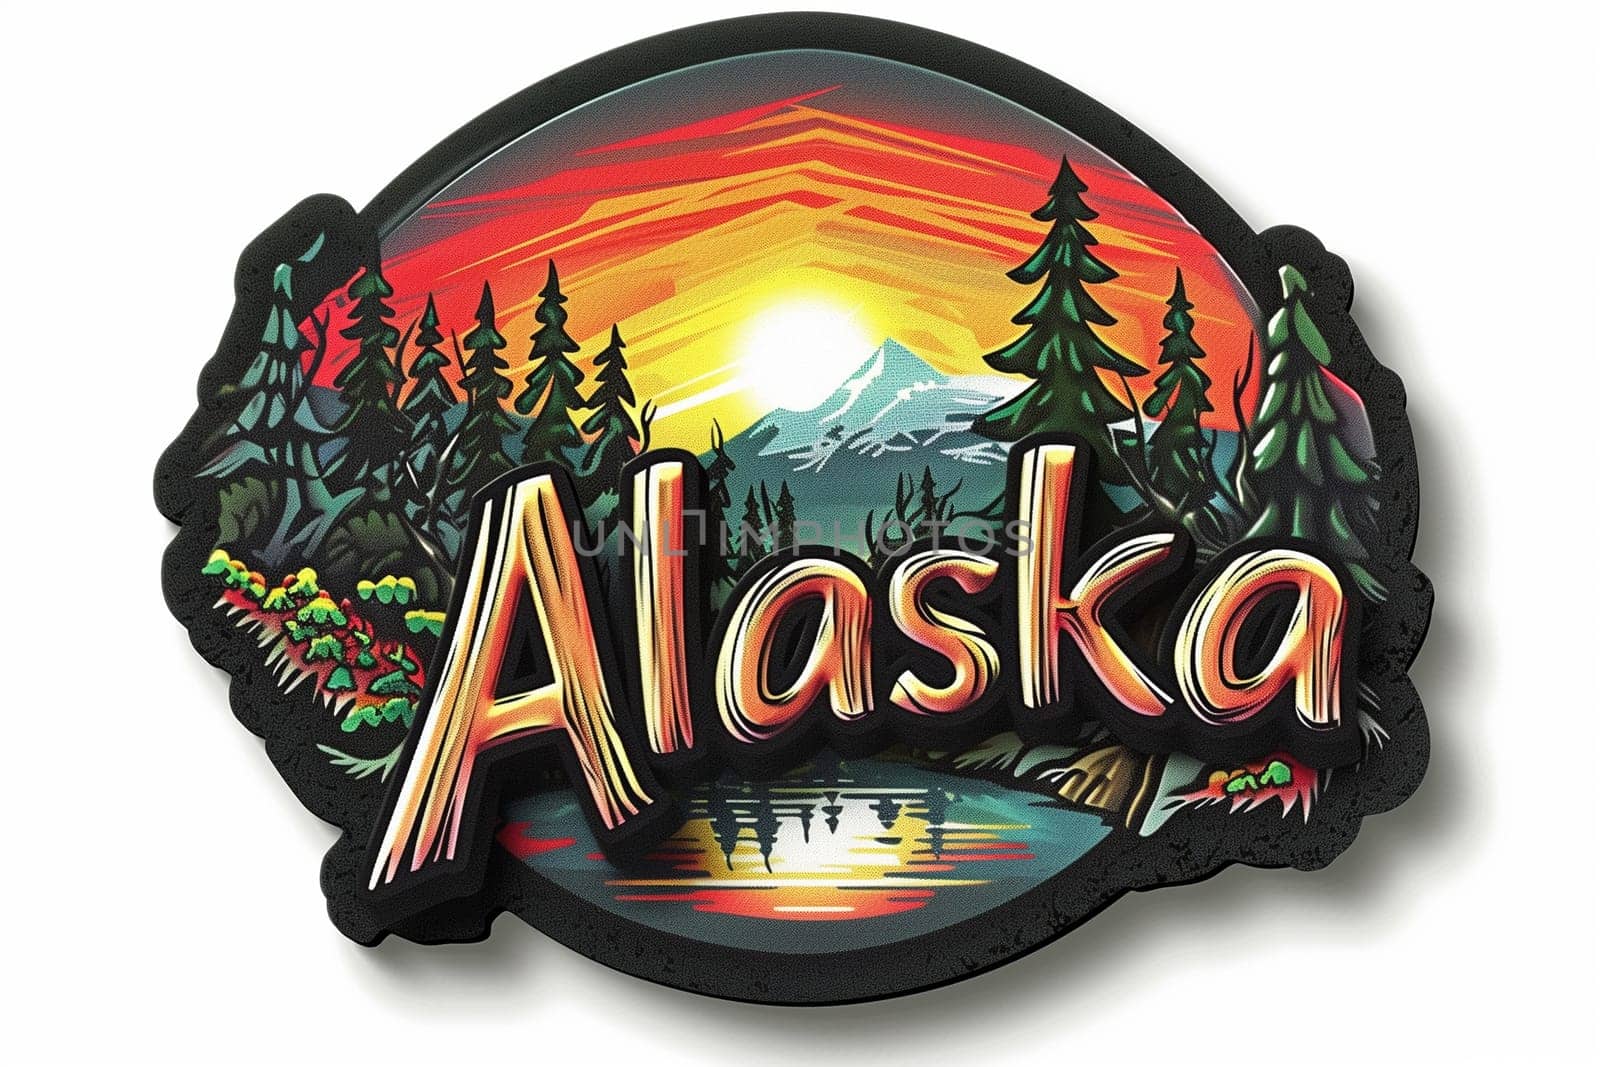 Sticker with the word Alaska placed in front of a mountain, showcasing the states natural beauty and rugged landscapes.